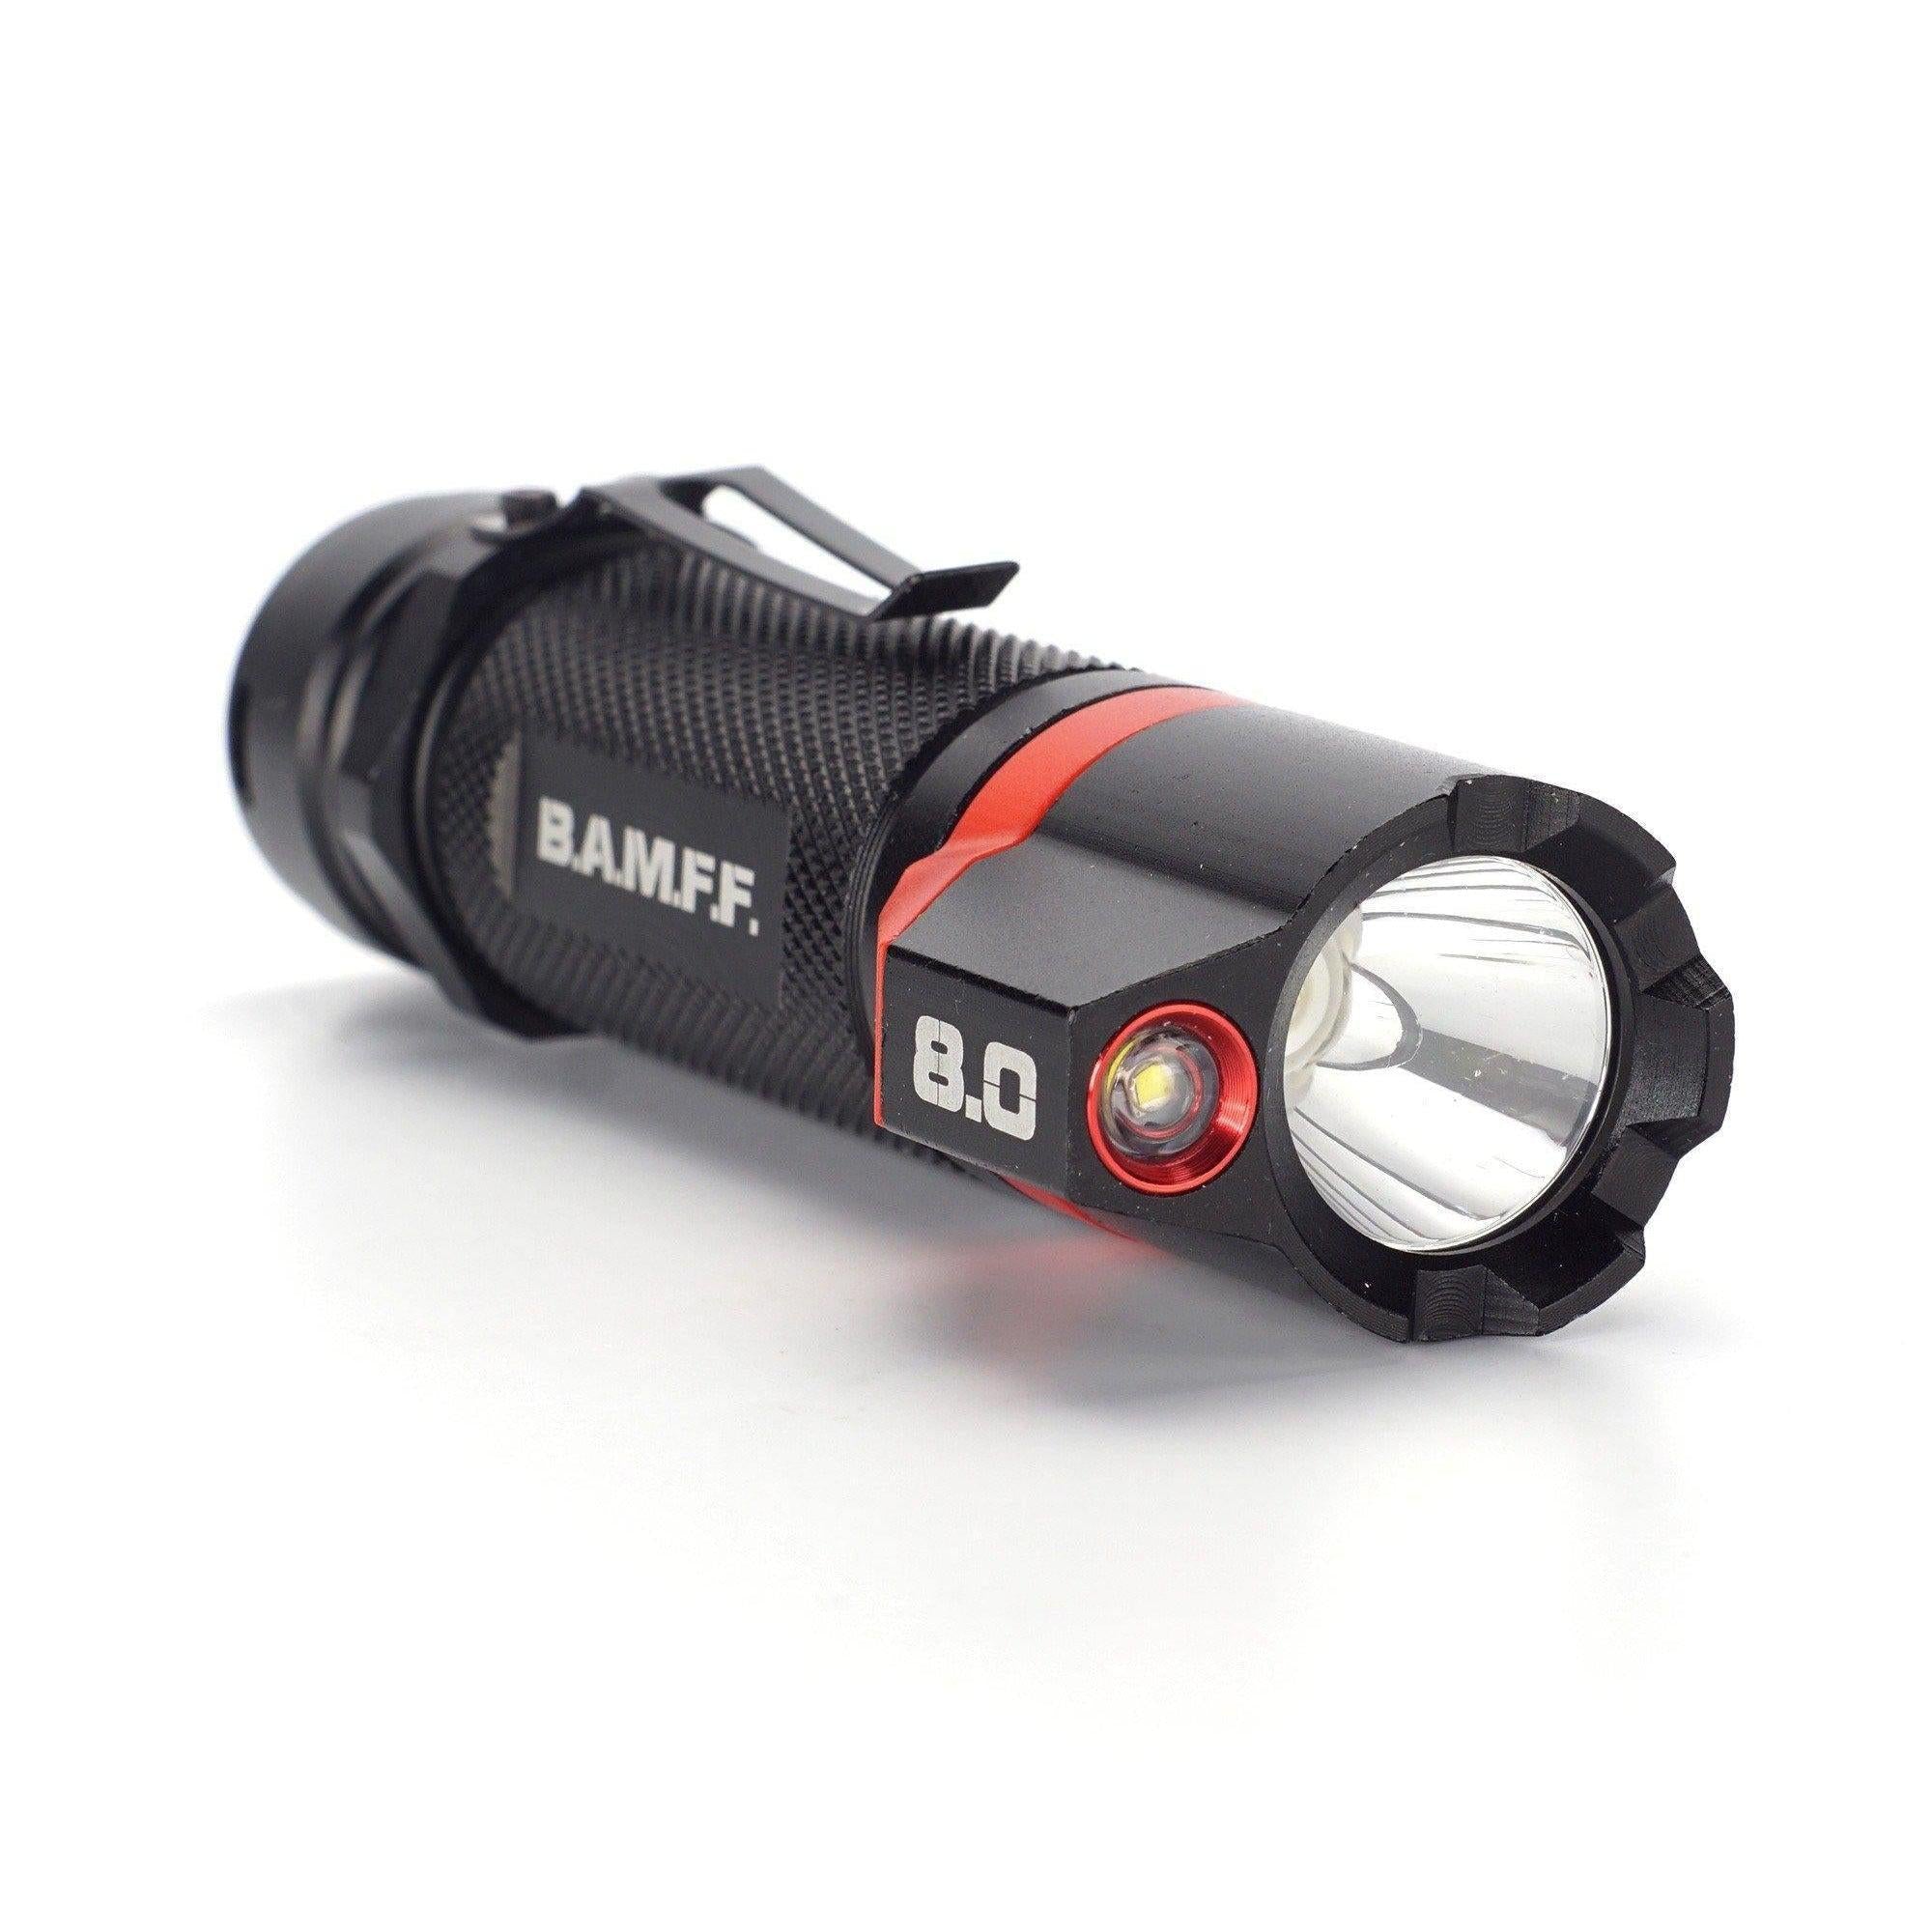 BAMFF 8.0 dual LED flashlight long distance and area lighting in one | STKR Concepts - striker flashlight